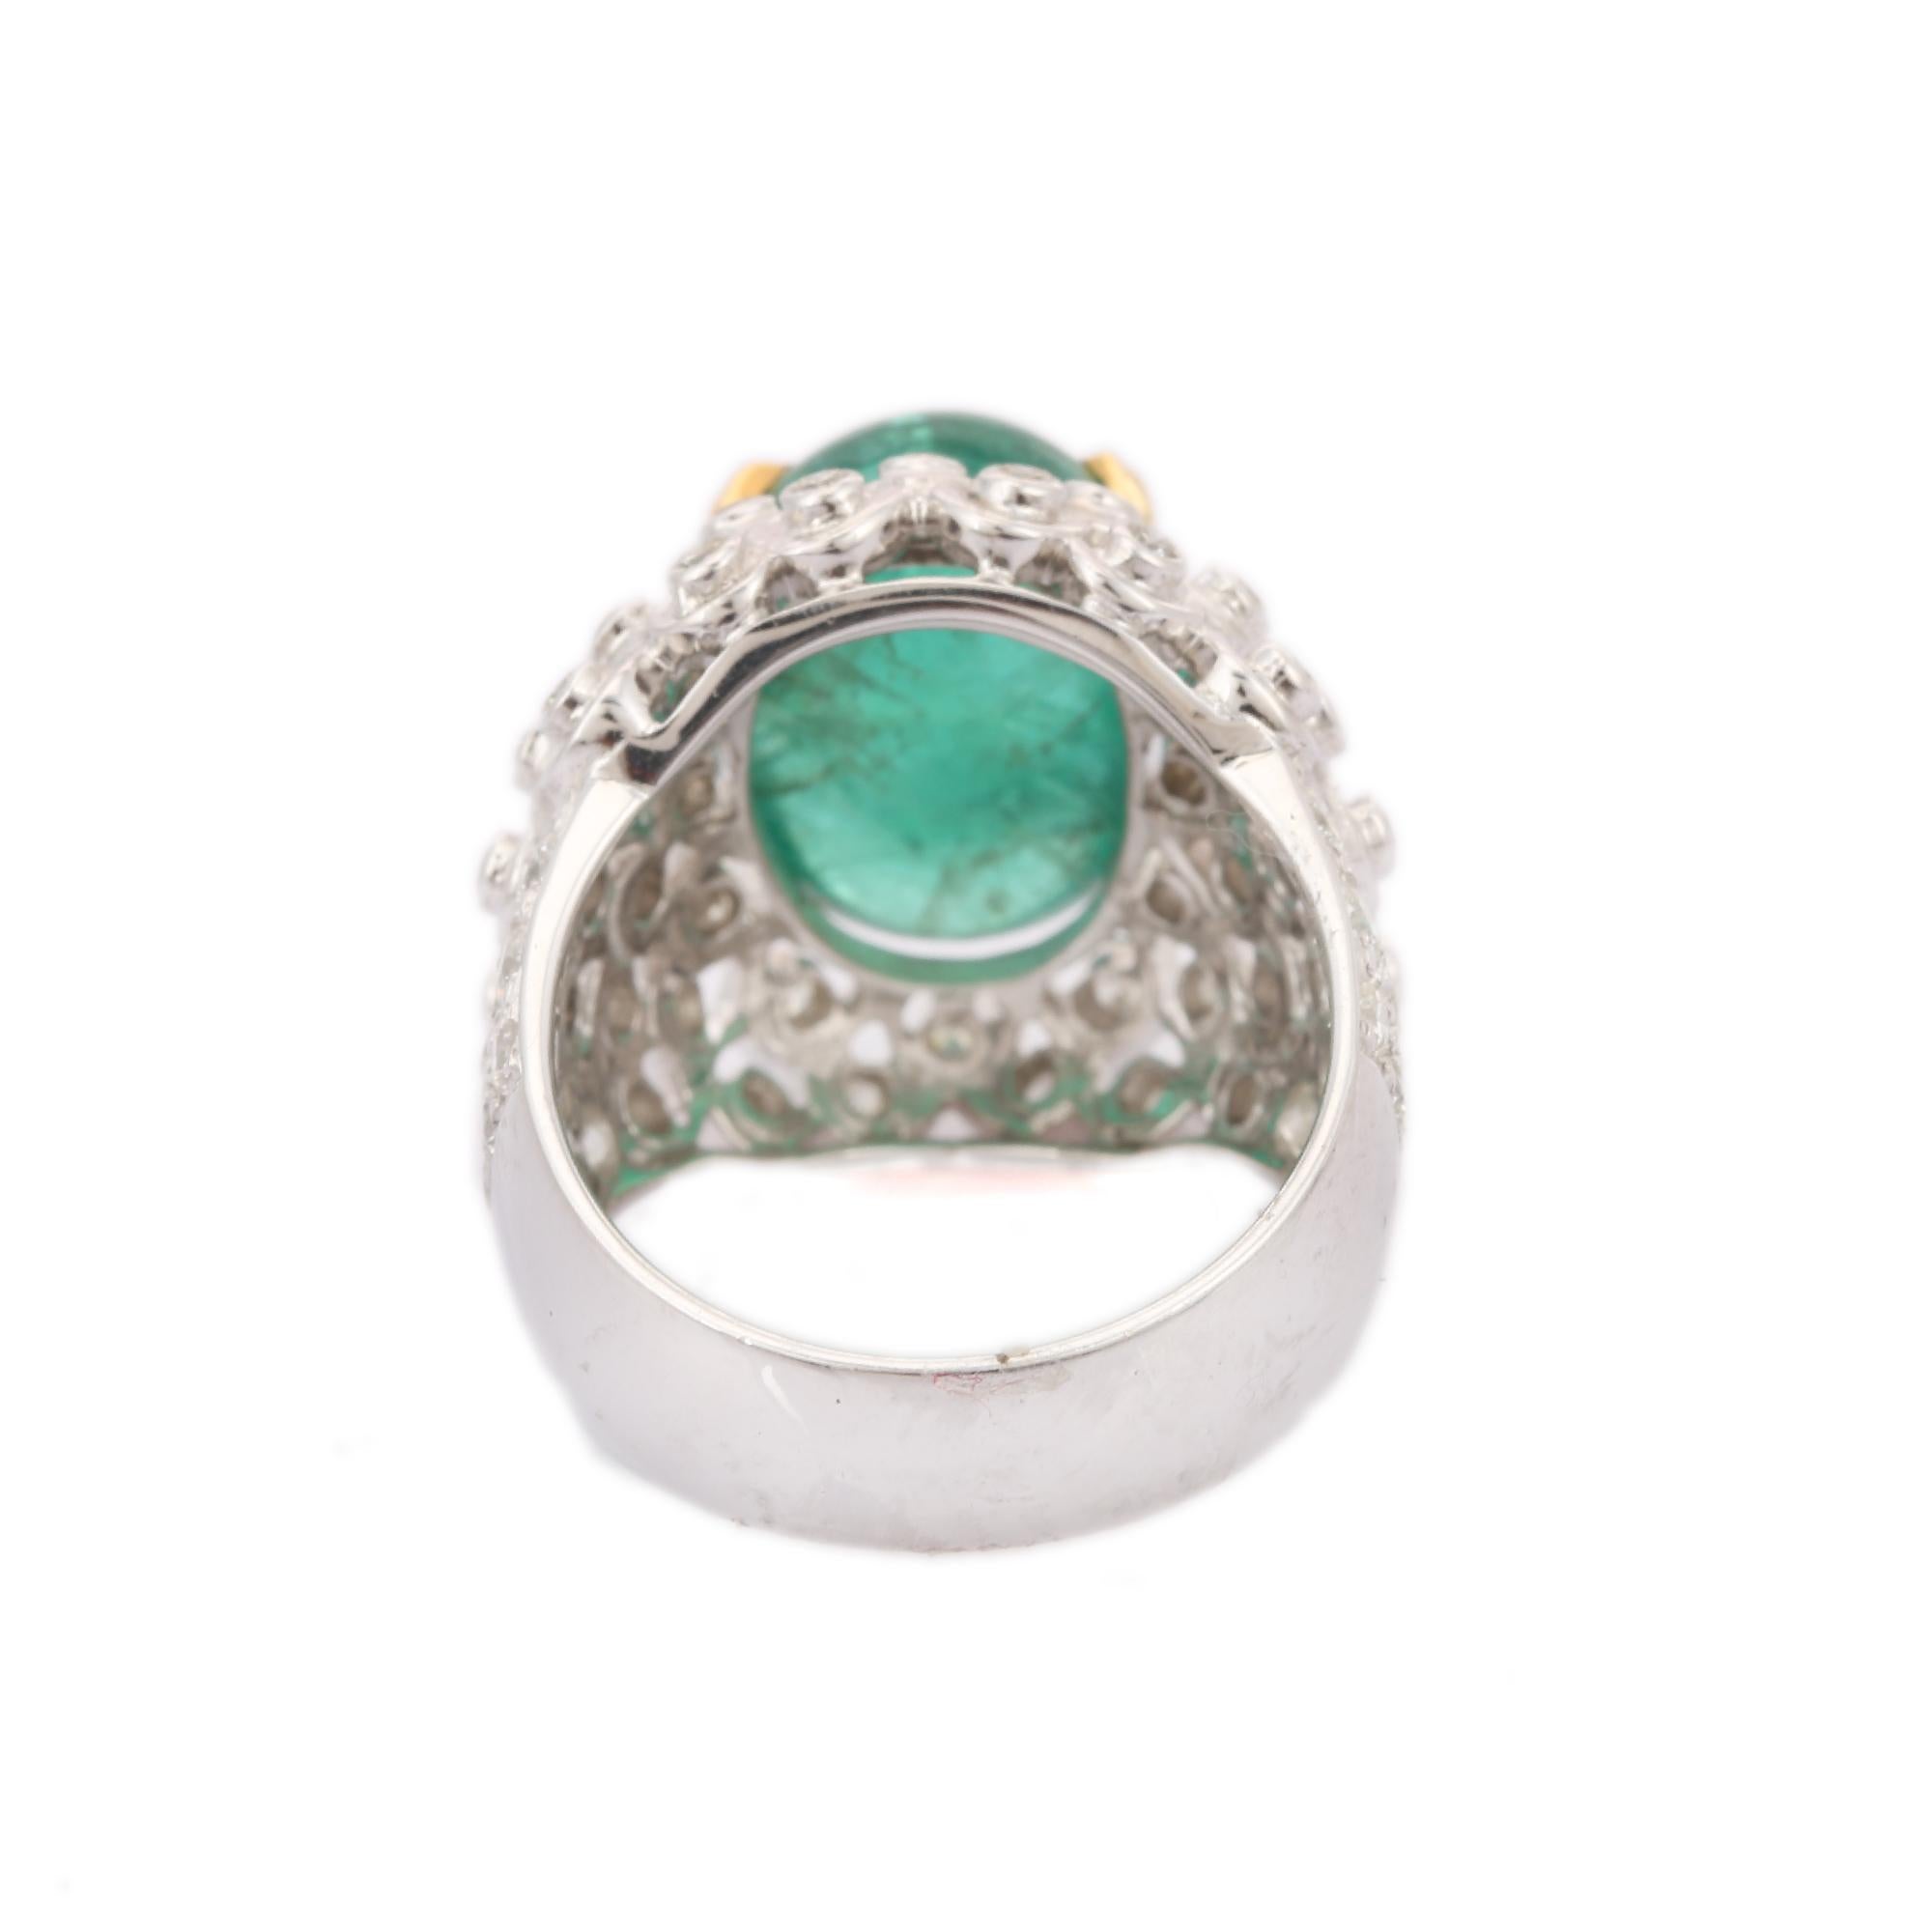 For Sale:  18kt Solid White Gold Estate Emerald Diamond Dome Ring For Women 4